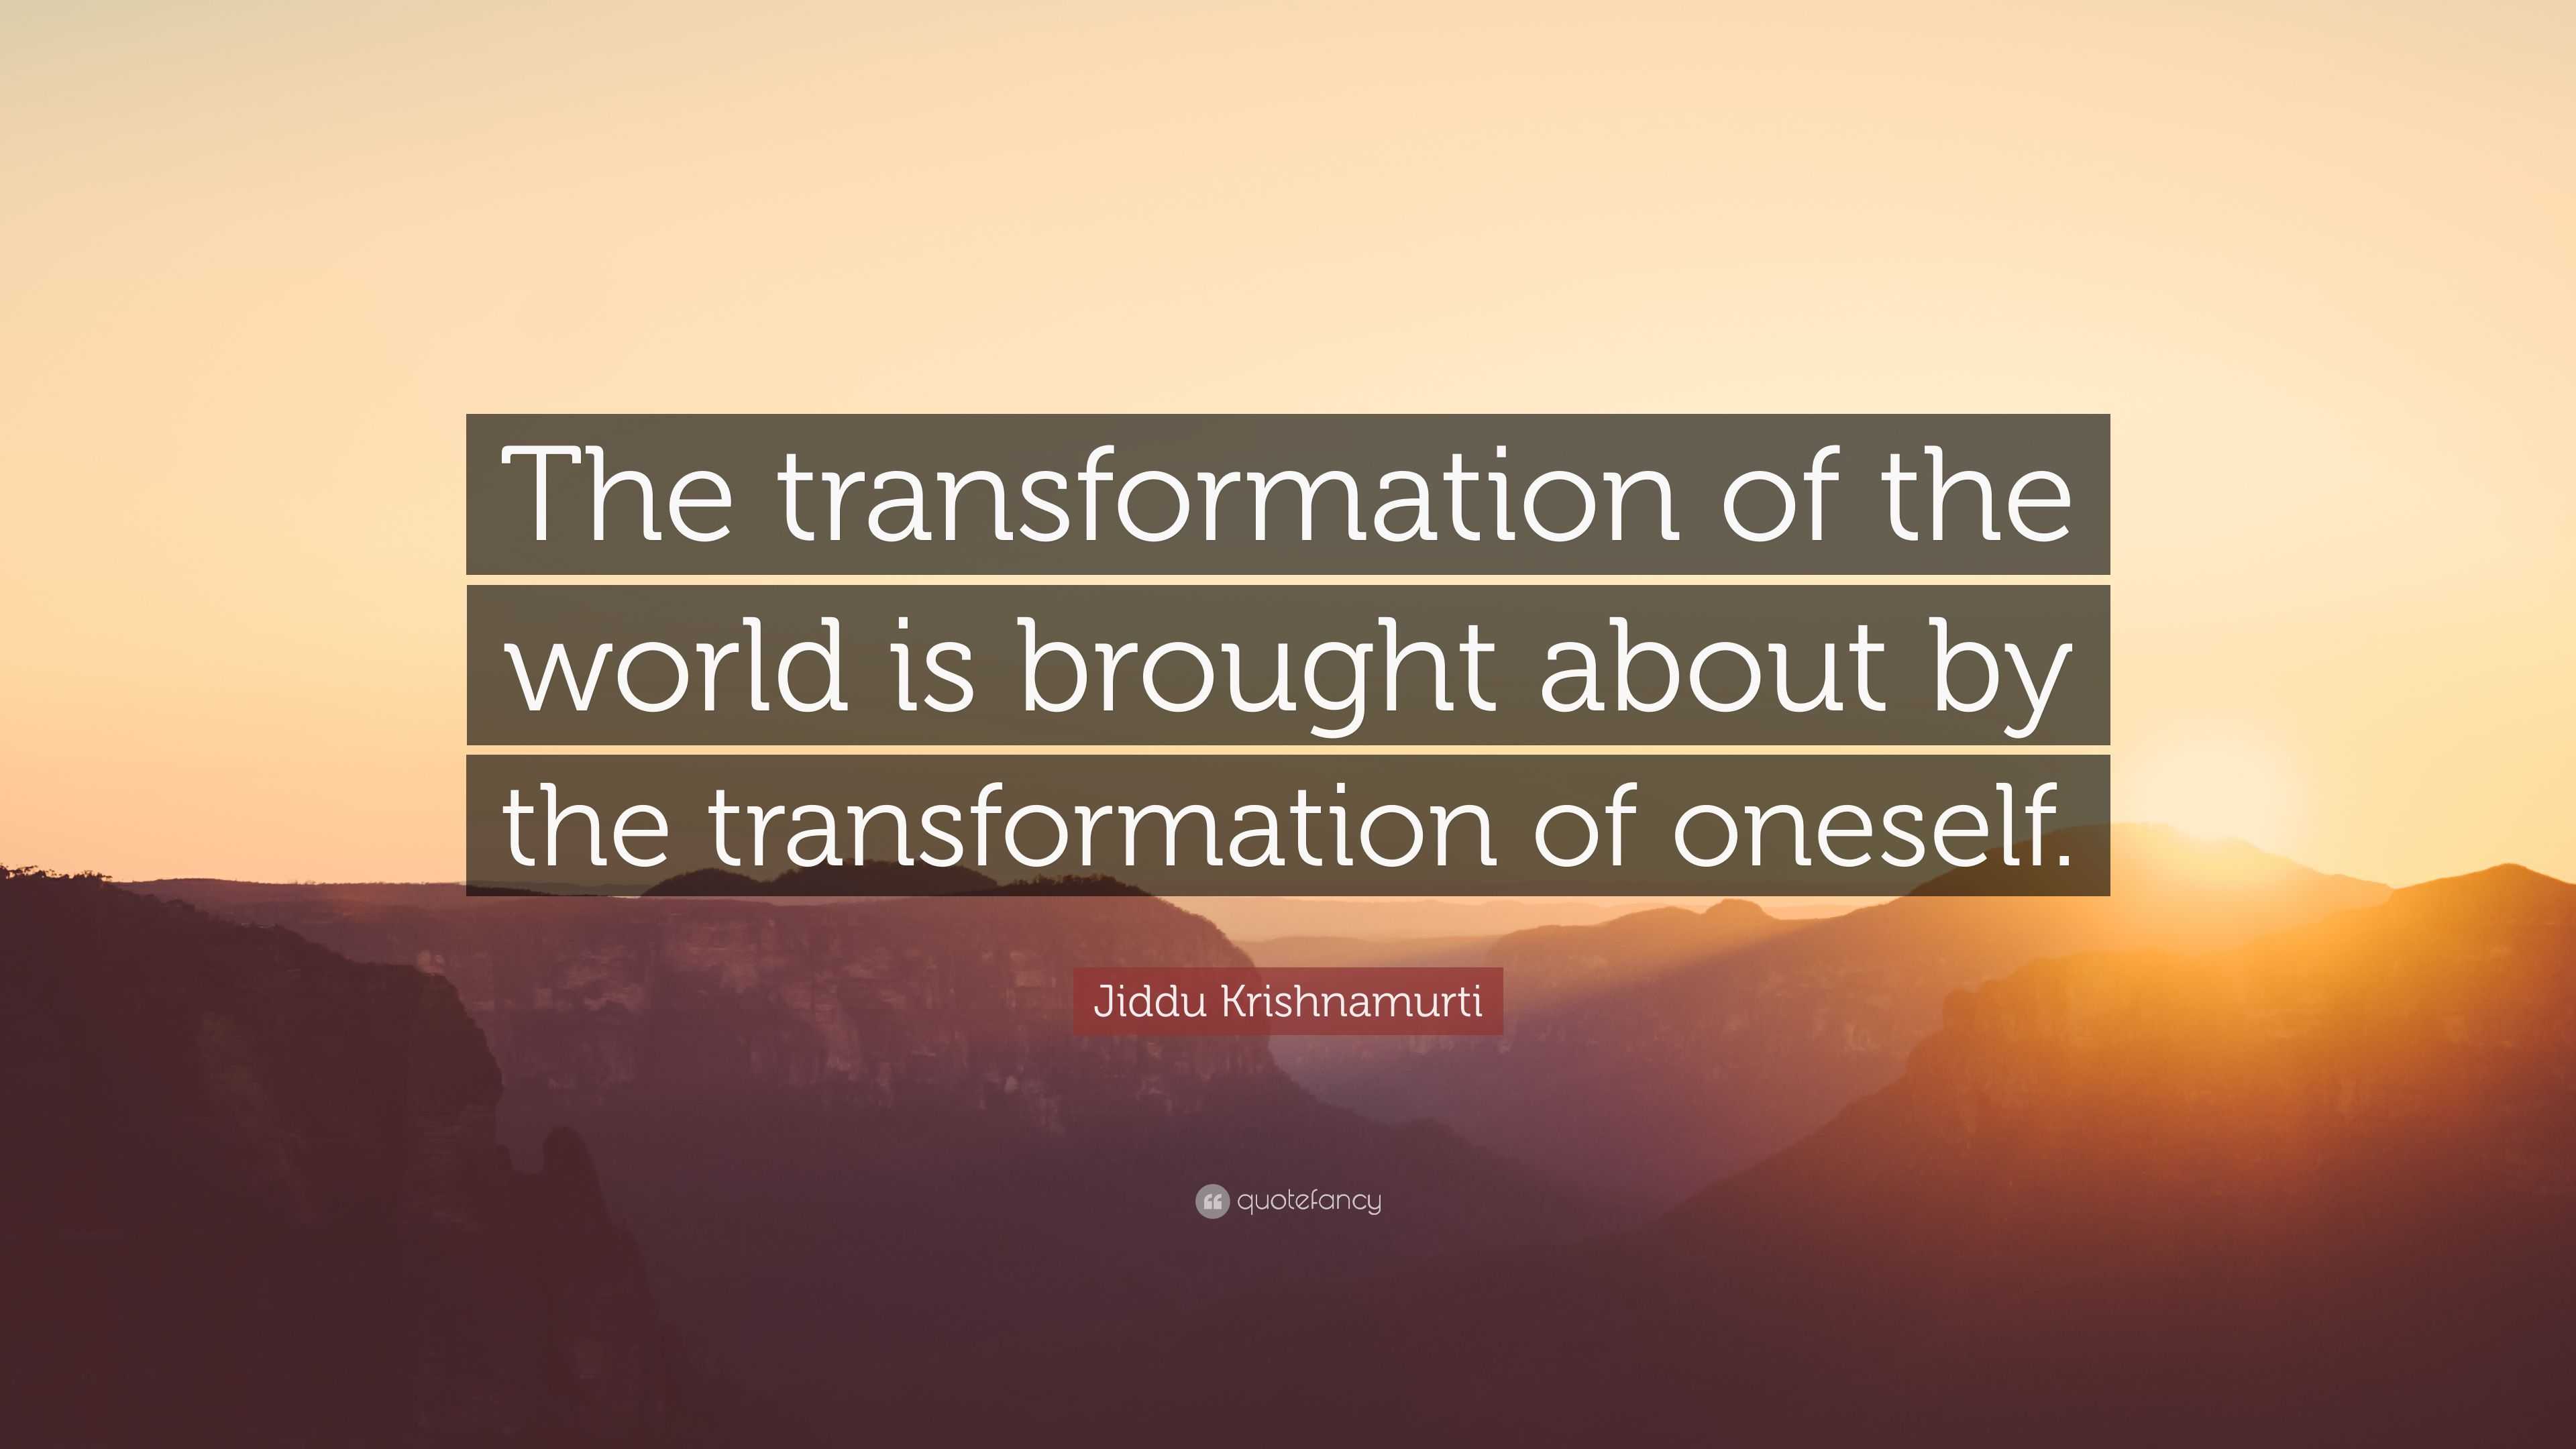 Jiddu Krishnamurti Quote: “The transformation of the world is brought ...